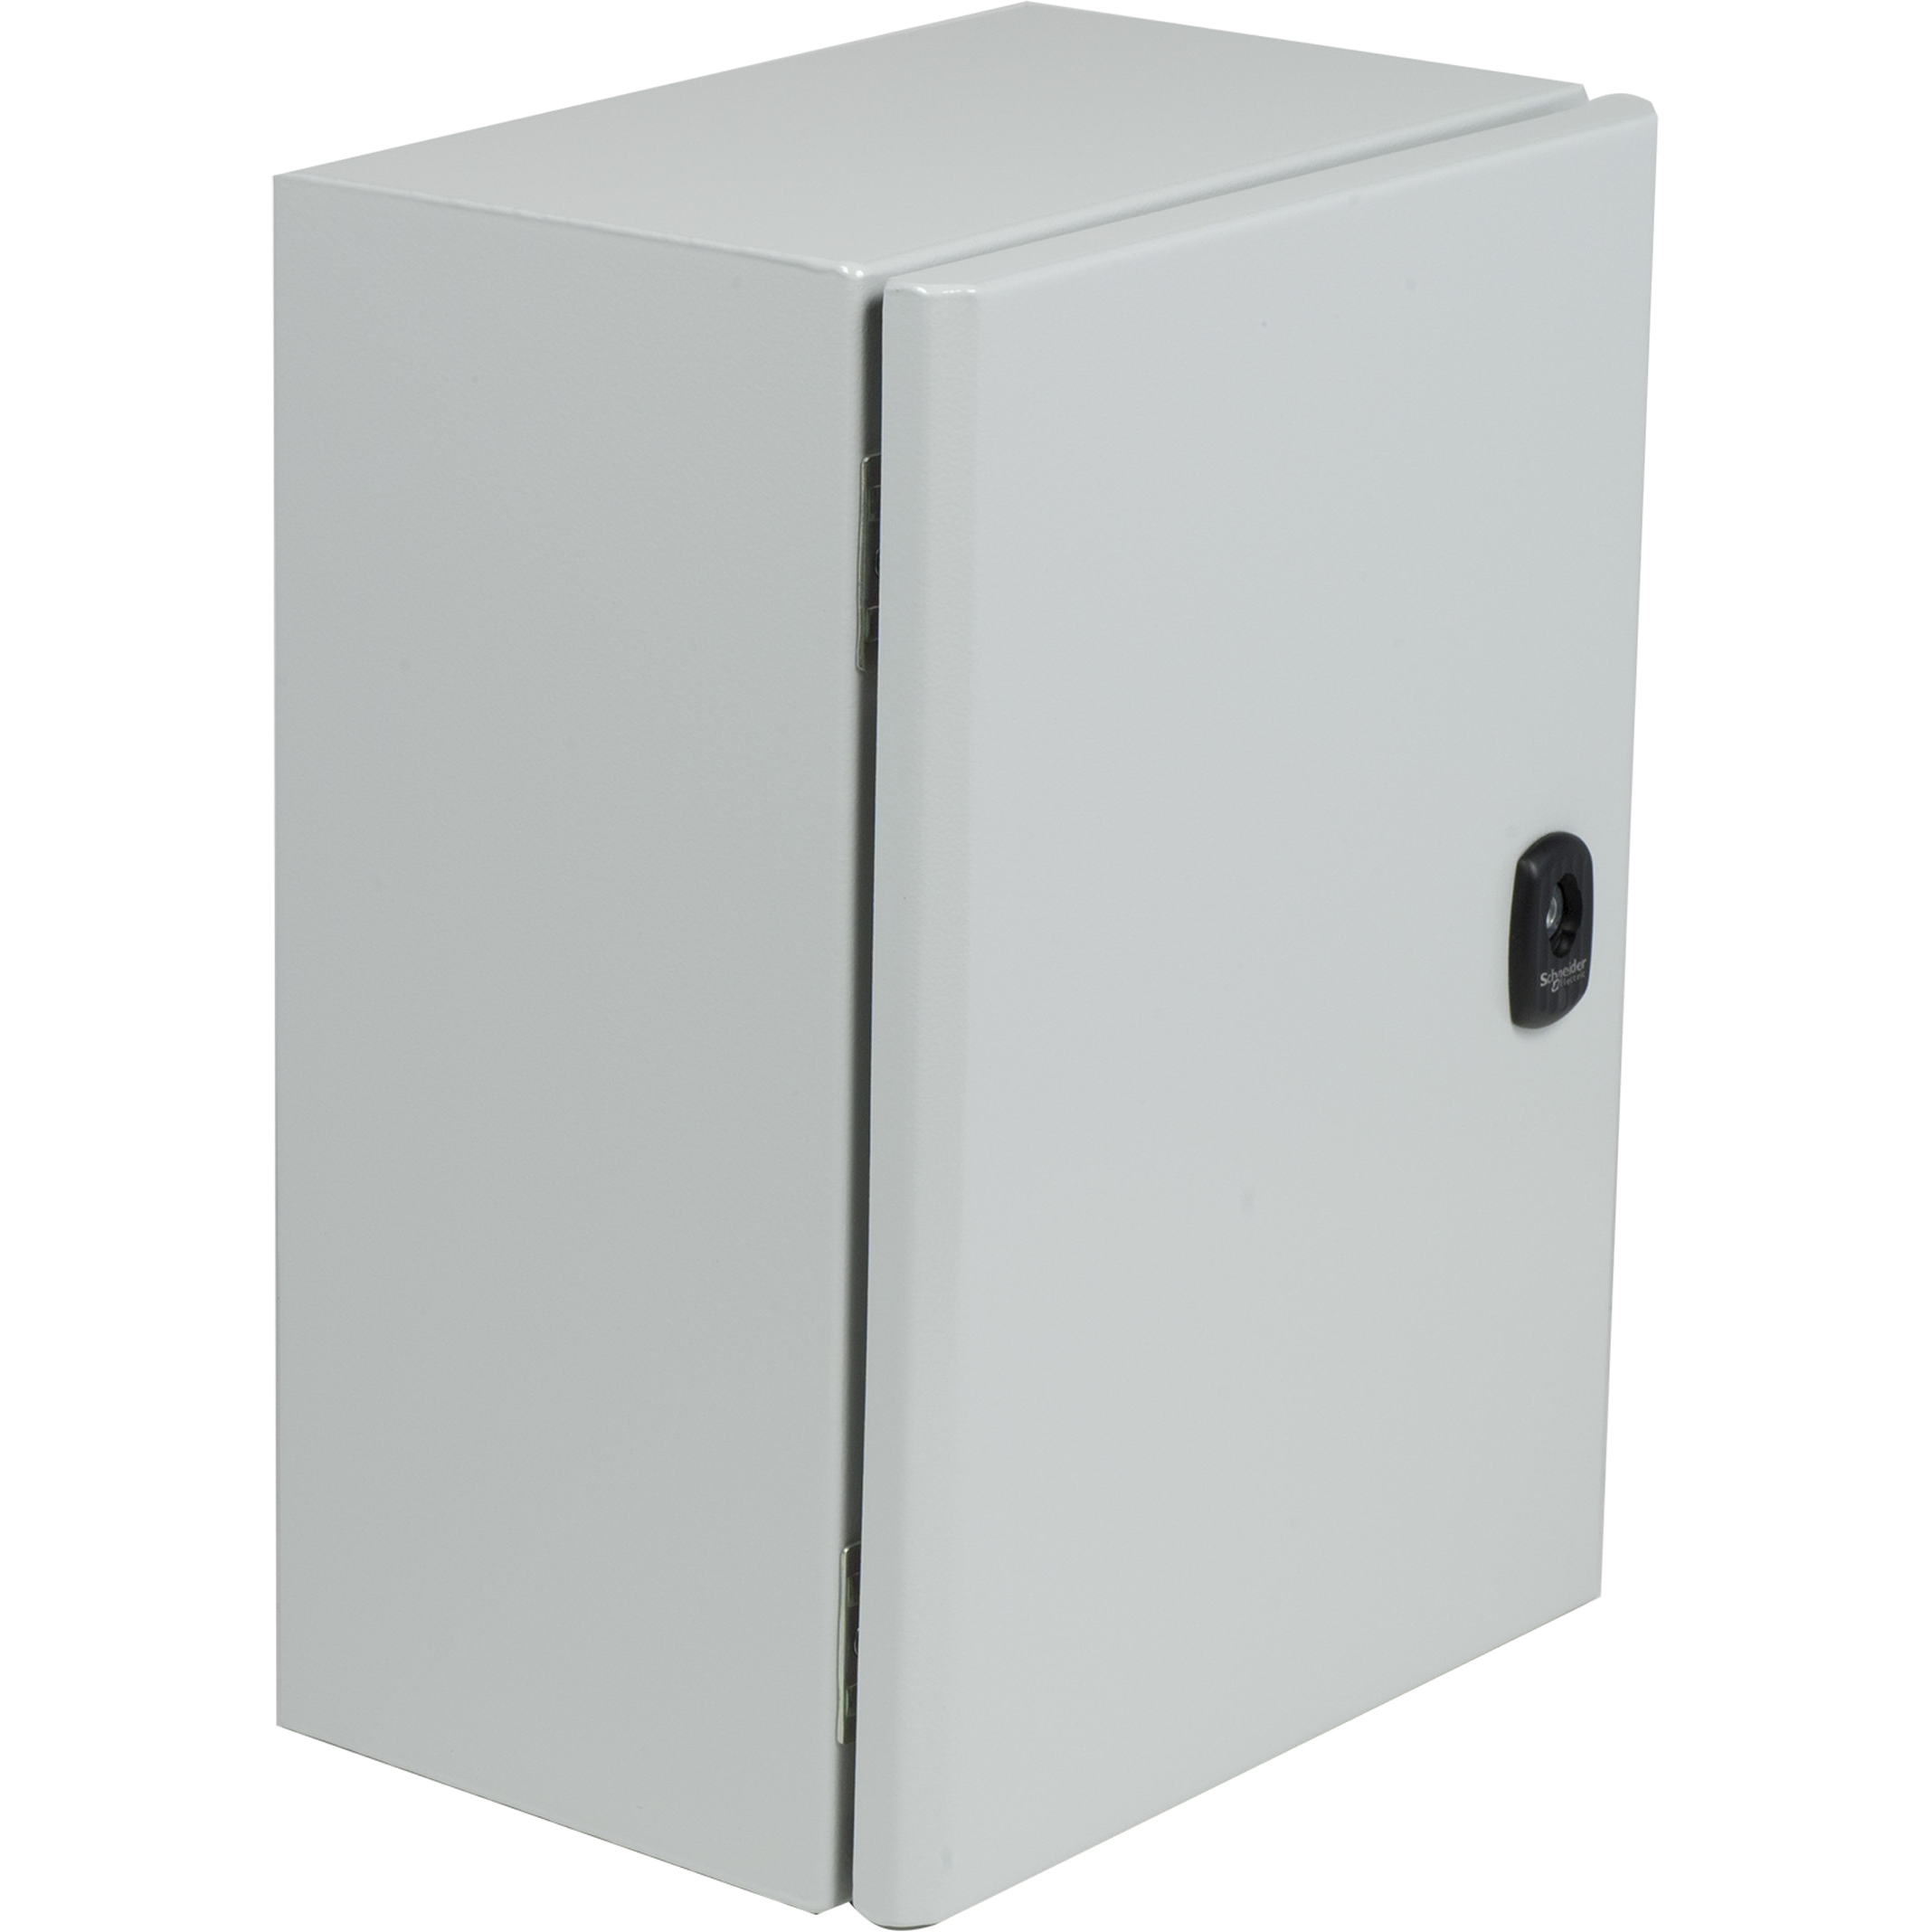 Wall mounted steel enclosure, Spacial S3DC, plain door, without plain chasis, 600x600x300mm, IP66, IK10